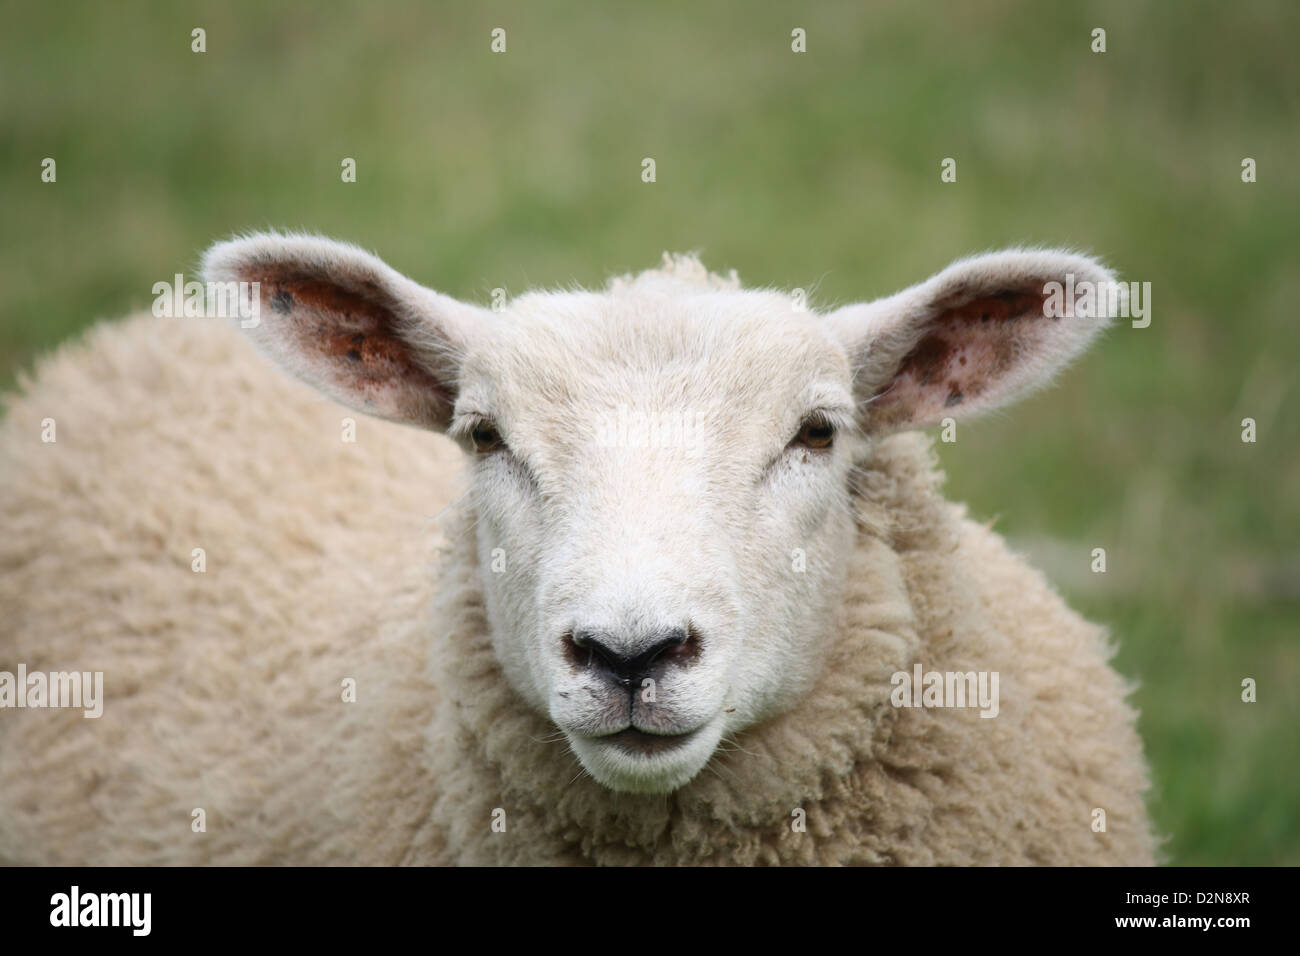 Portrait of a sheep Stock Photo